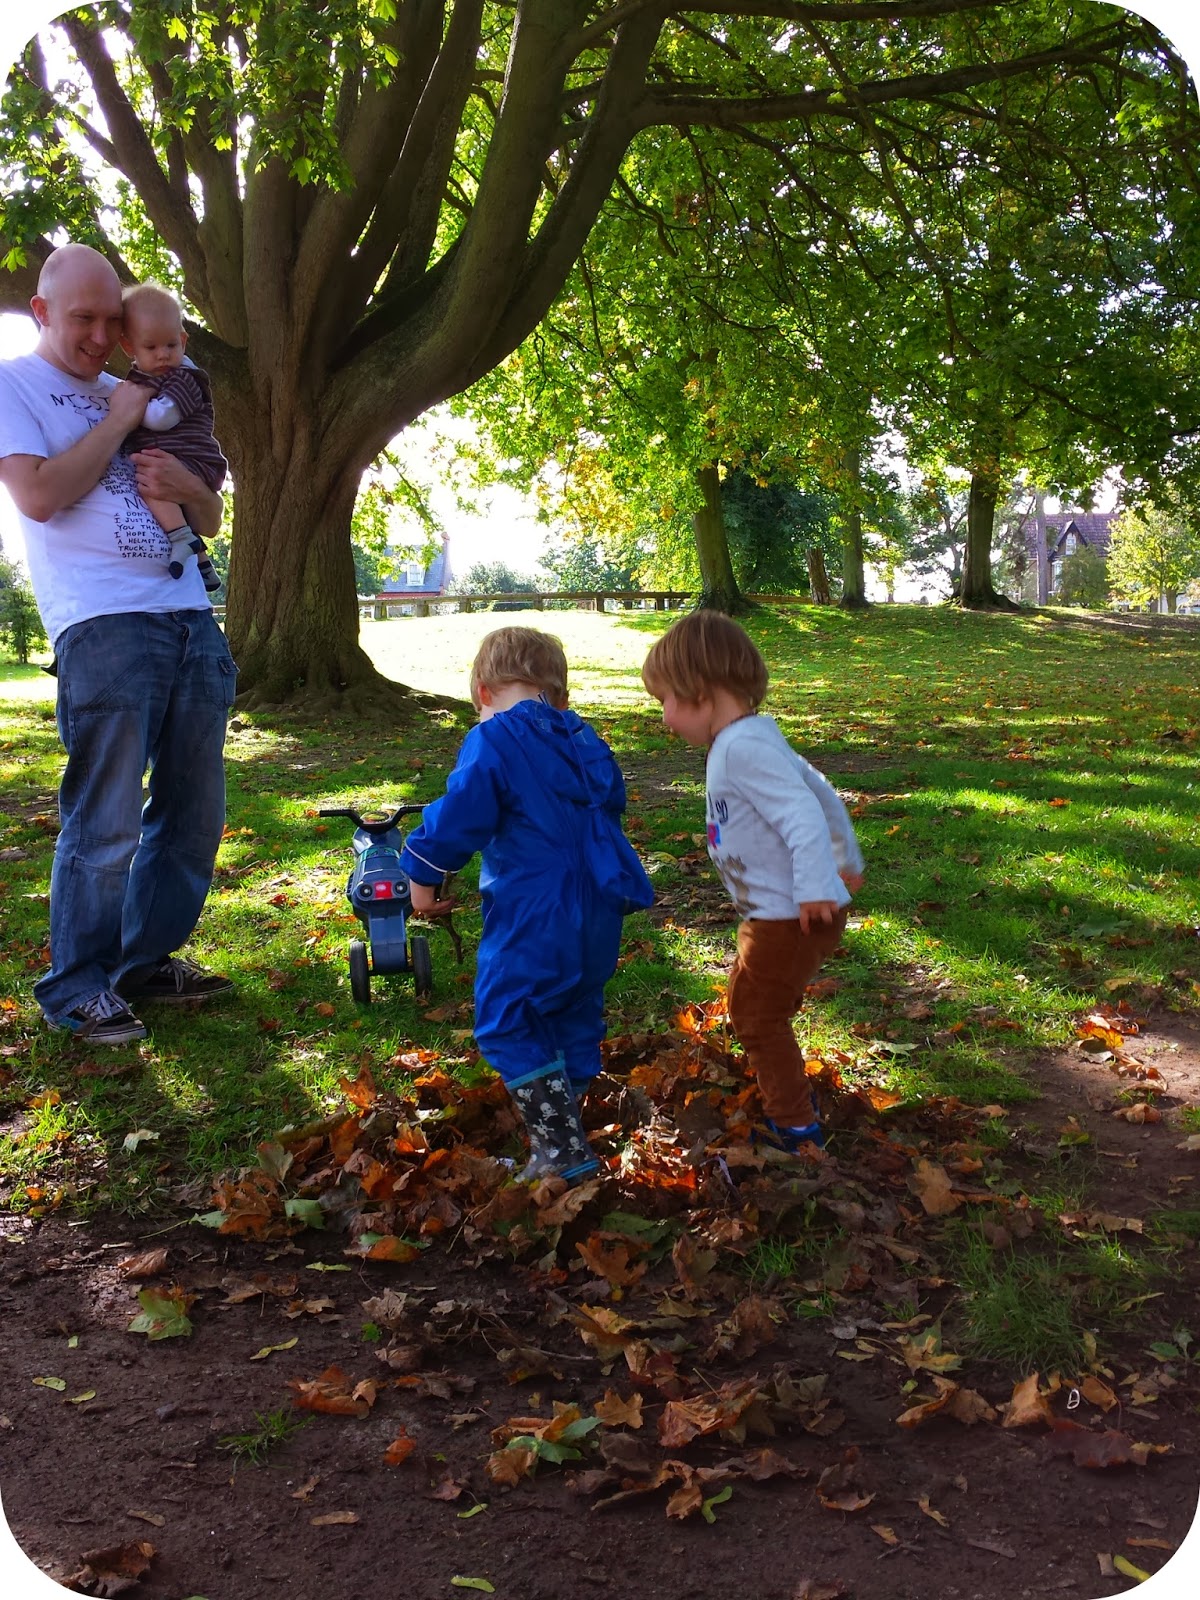 The Adventure of Parenthood: Exploring Autumn with a Toddler